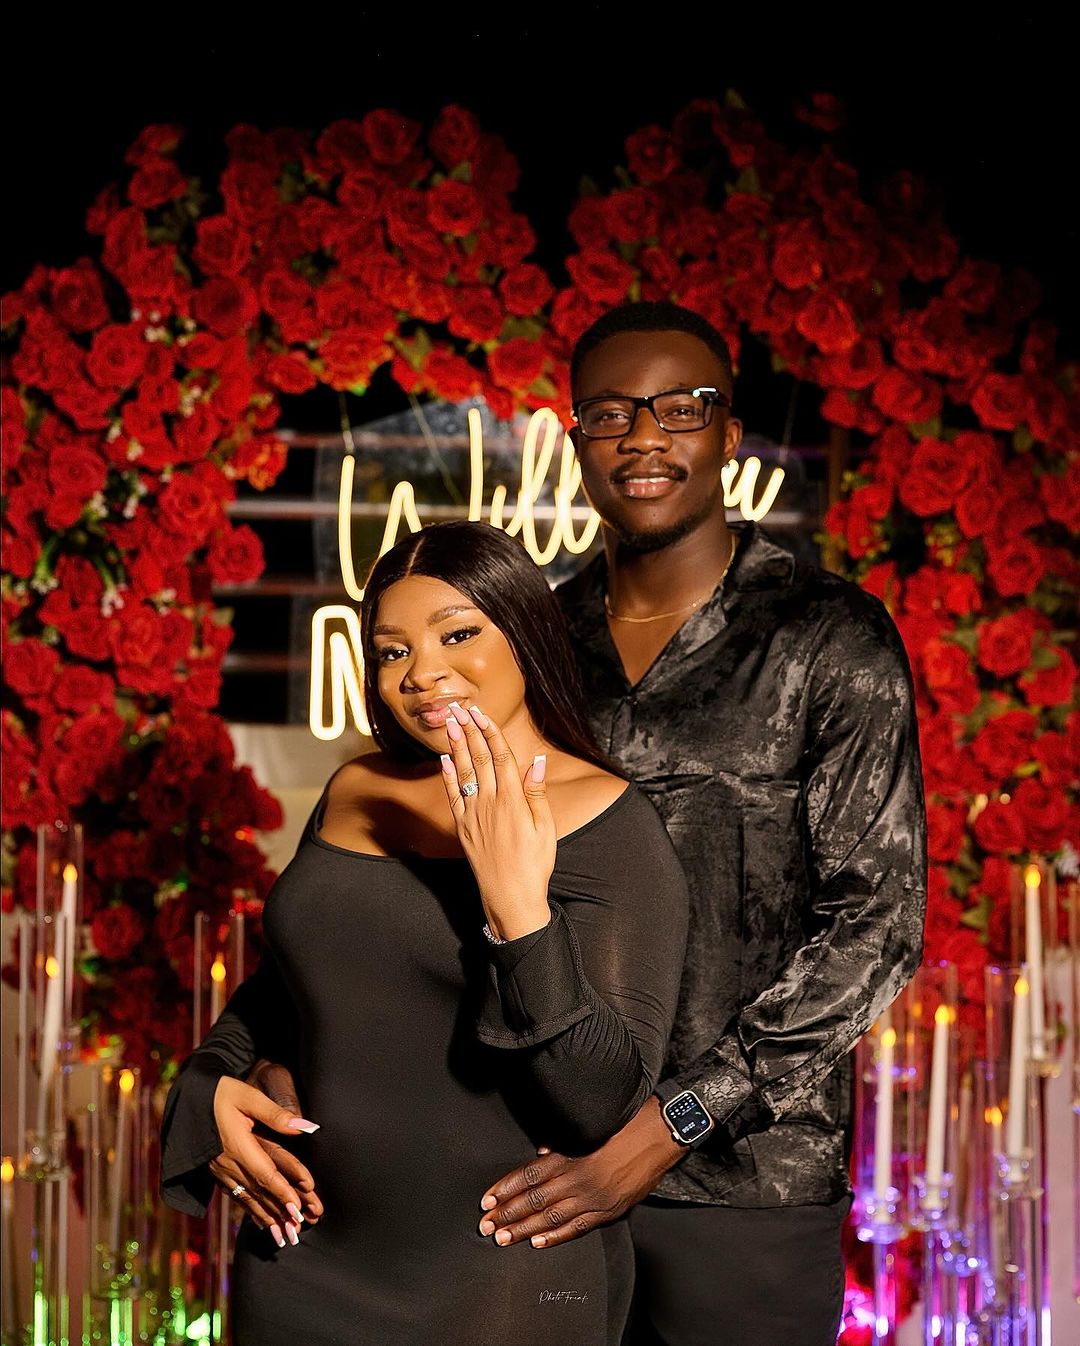 "Thank you deeply for choosing and loving me" BBNaija's Queen Atang pens heartwarming note to Fiancee as he unveils his face (Photos)